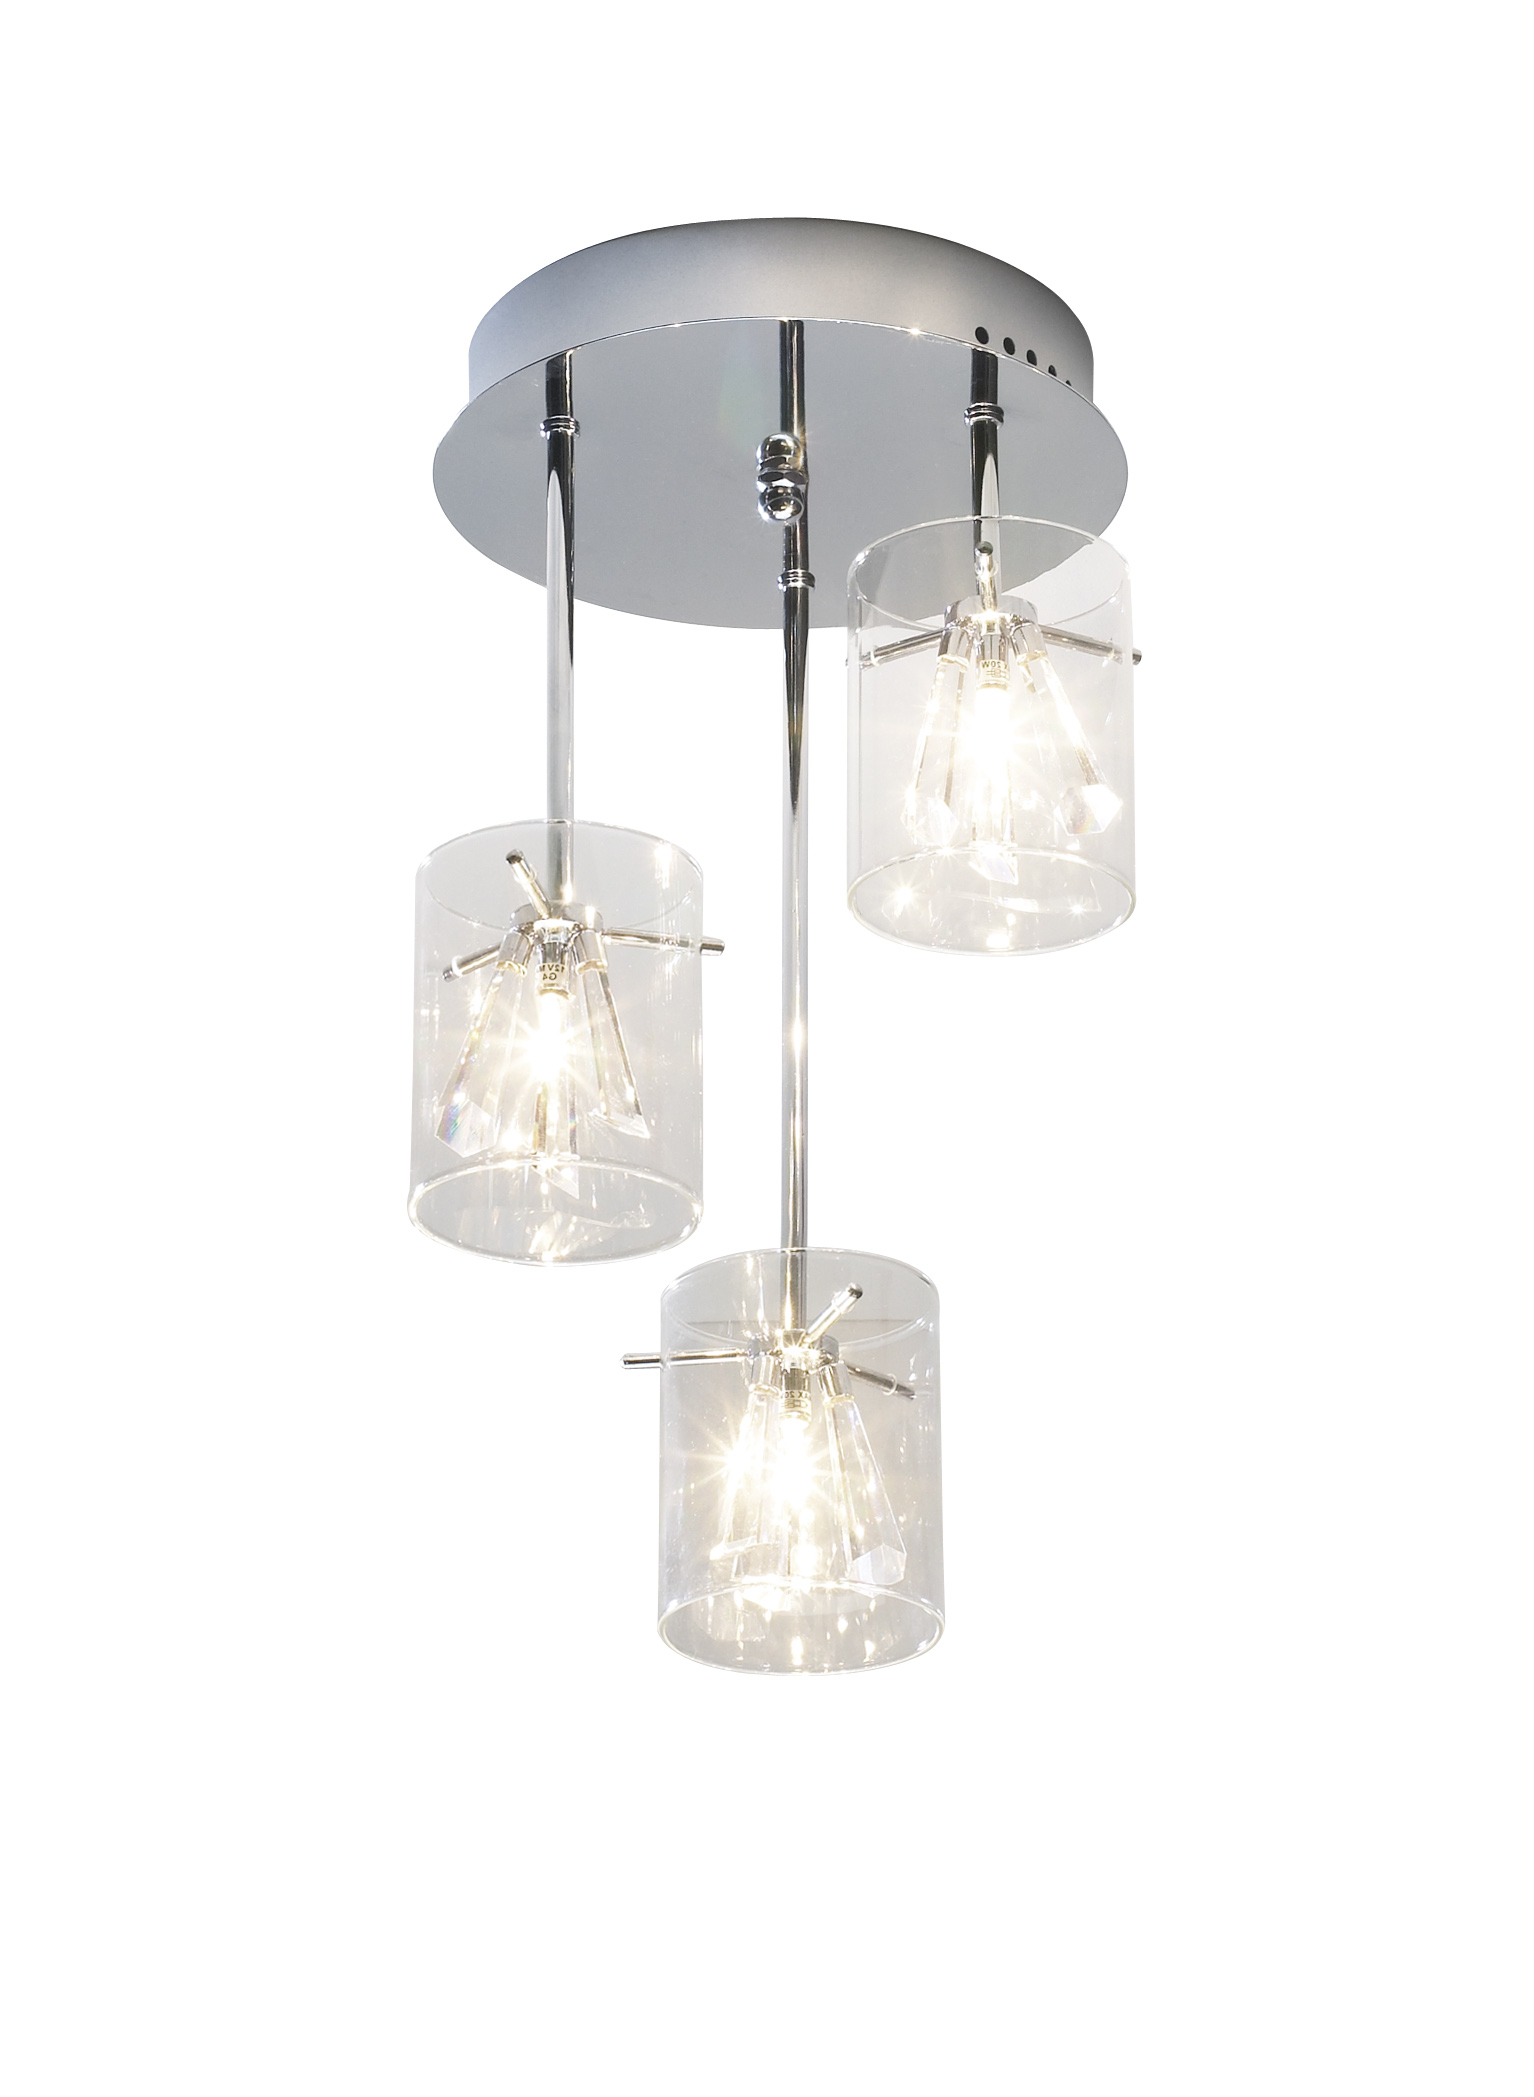 Somerset 3 light modern crystal pendant light ceiling light polished chrome finish glass cylinder shade with crystal droppers